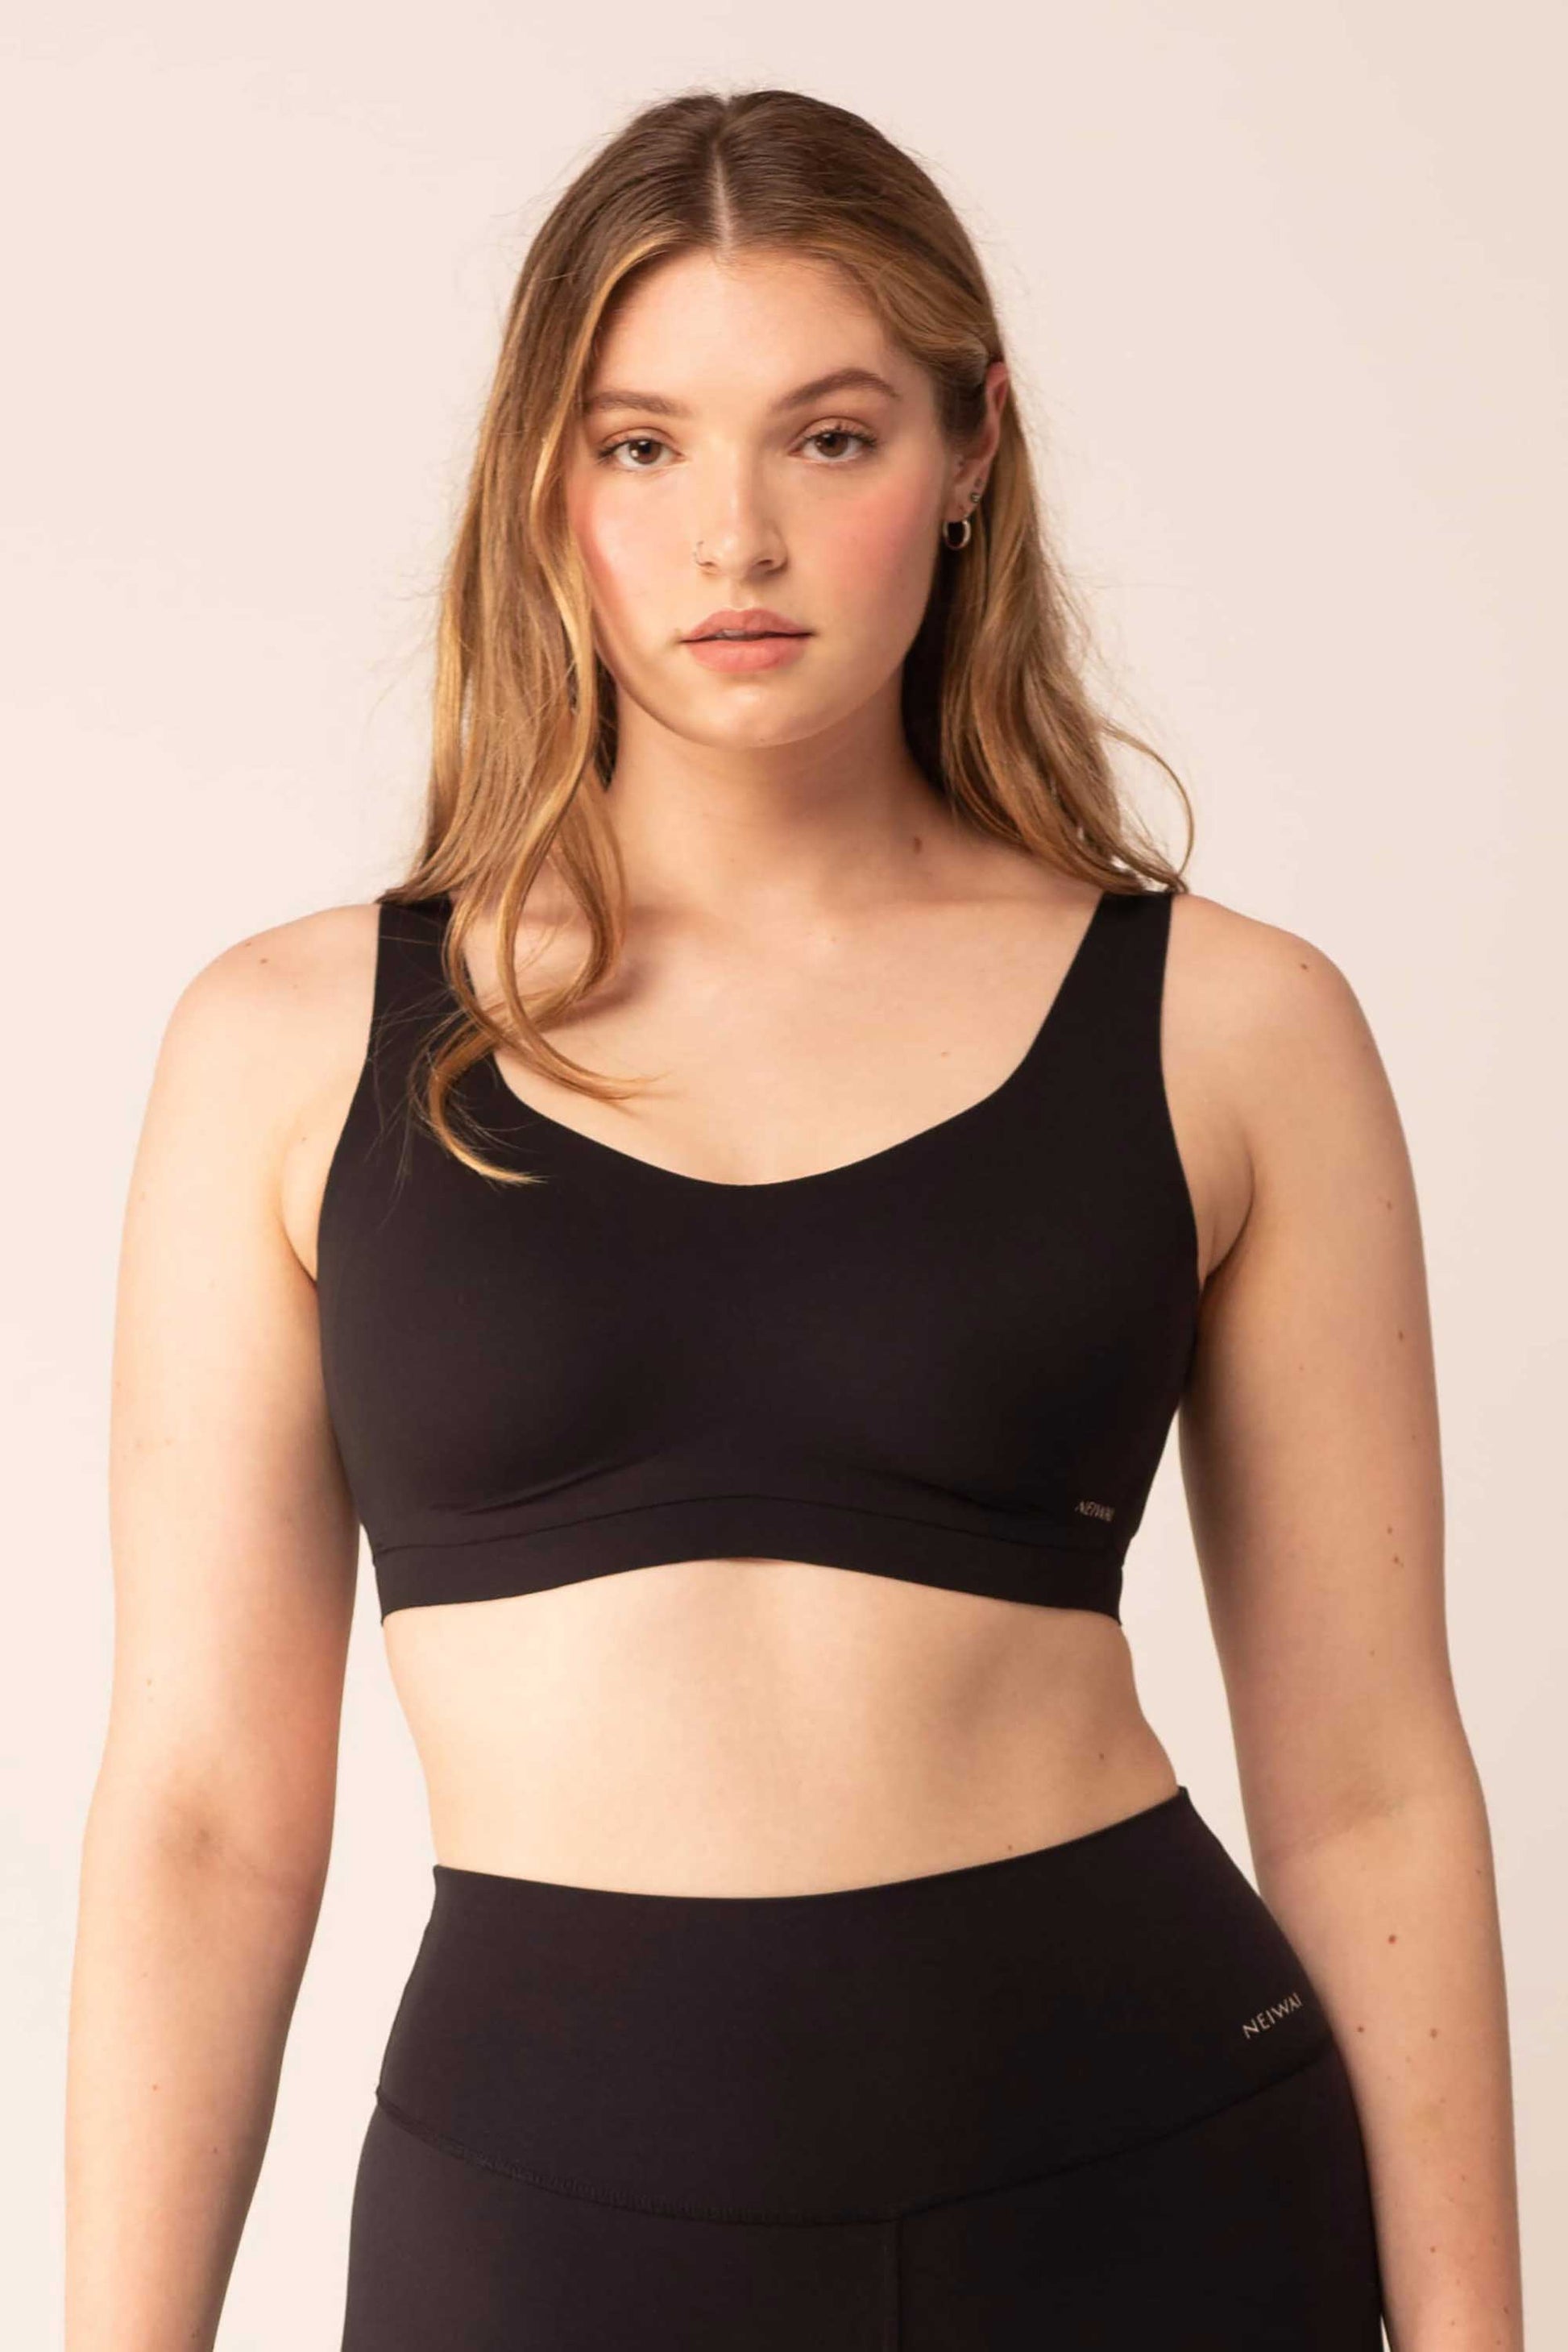 NYT Wirecutter on X: A truly supportive sports bra can be  workout-changing. We recruited more than two-dozen panelists—with band sizes  30 to 44 and cup sizes A to JJ—to test sports bras